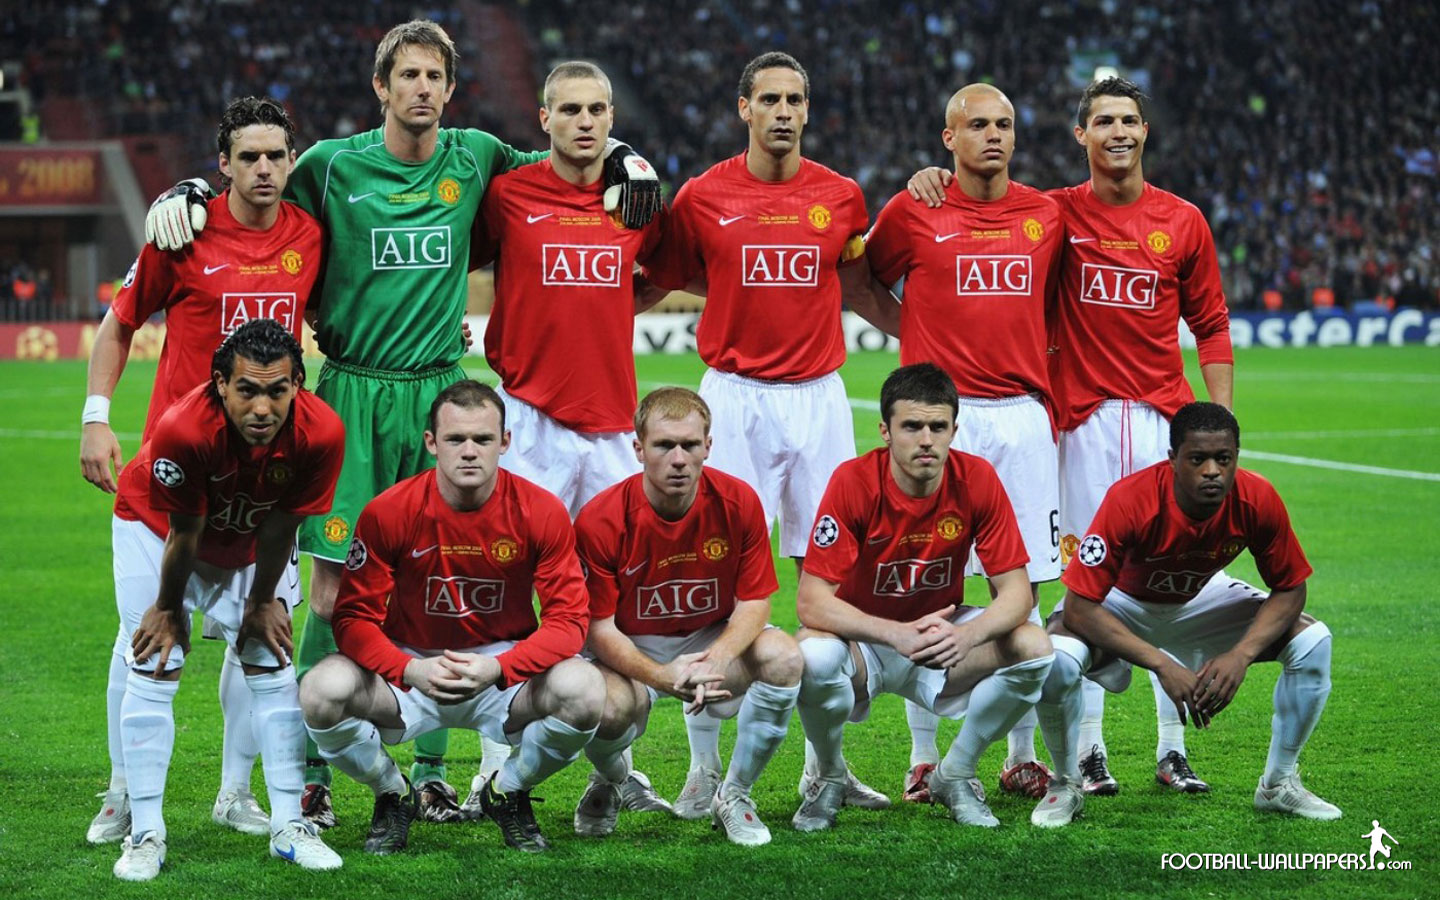 Manchester United F.C. matches IMAGES VIDEOS